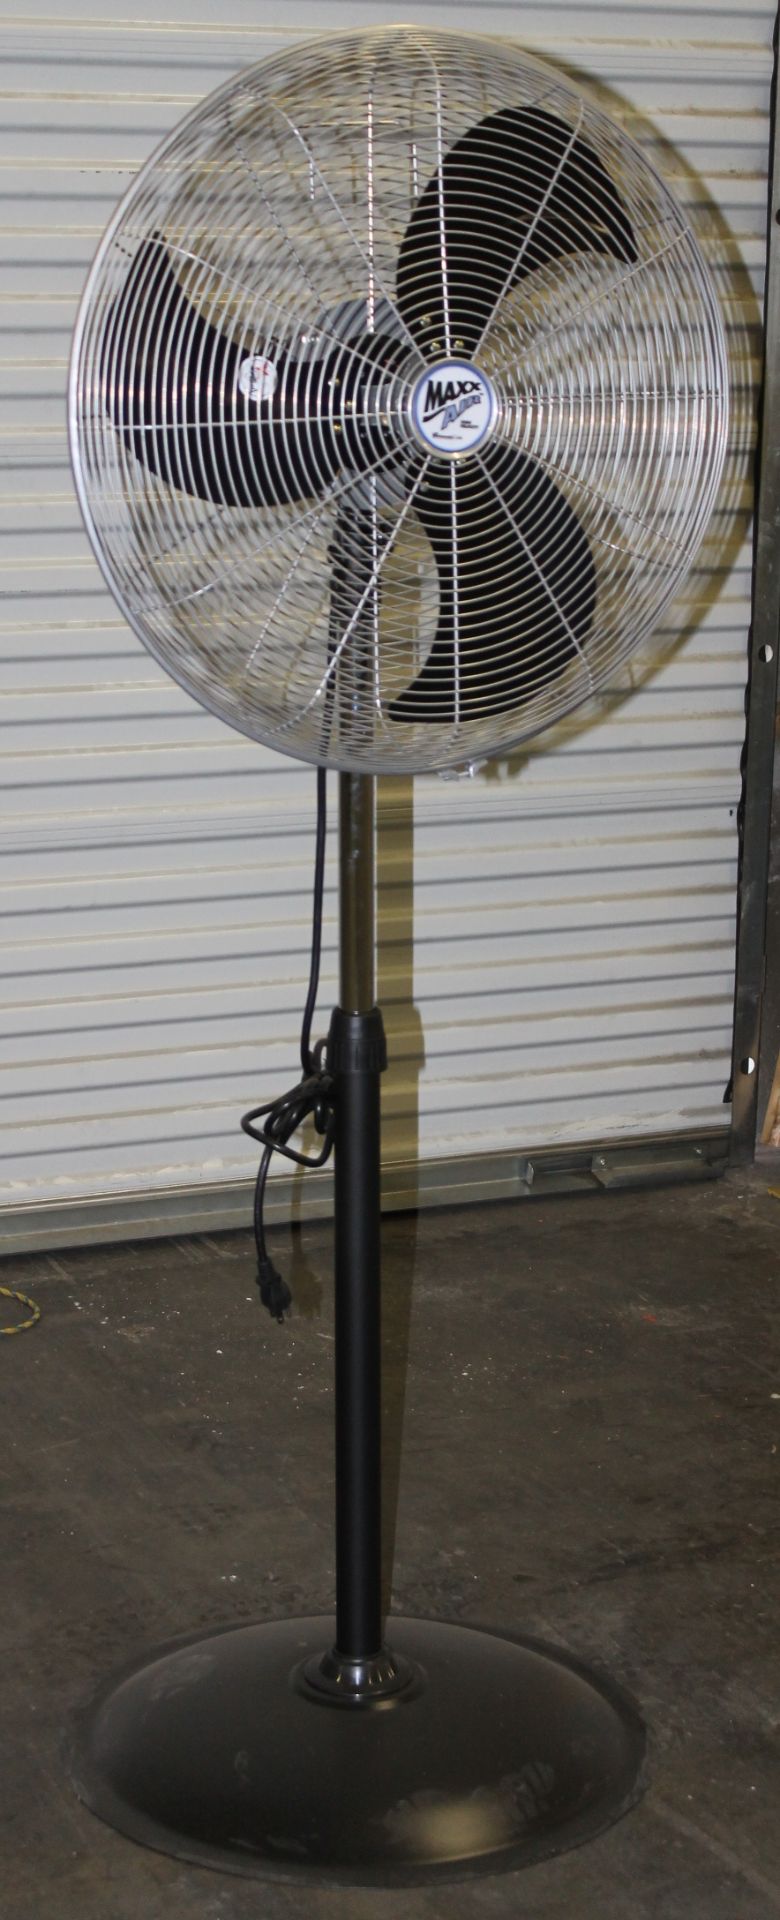 HIGH VELOCITY 22" OSCILLATING PEDESTAL FAN,  HEAVY DUTY 3-SPEED THERMALLY PROTECTED MOTOR,